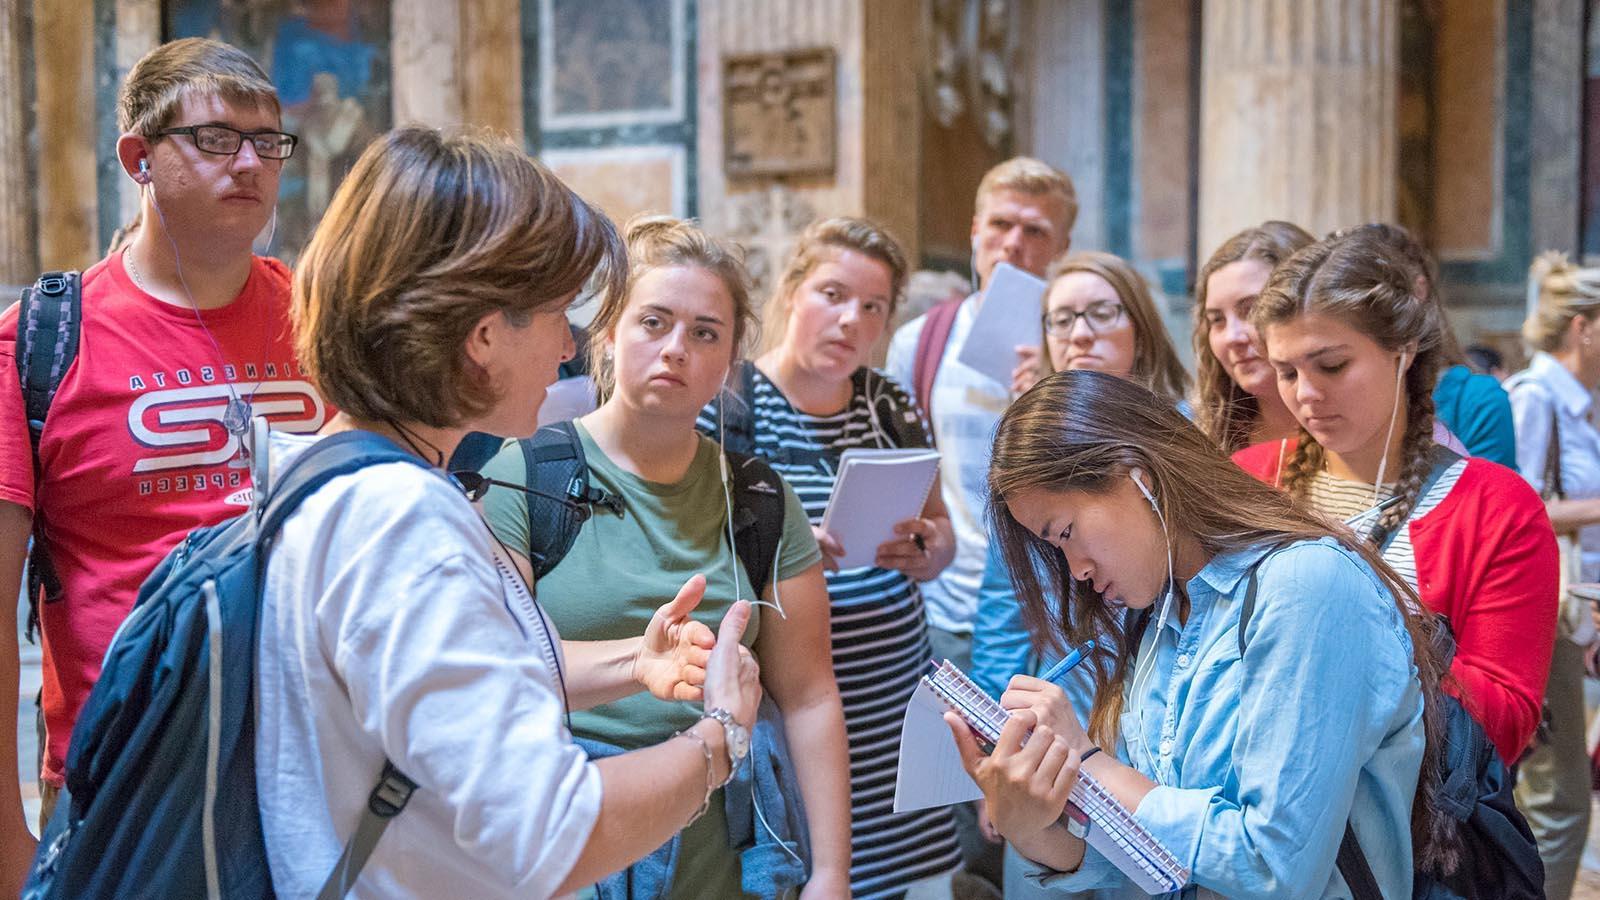 Study abroad students in the Pantheon in Rome, 意大利, taking notes while listening to lecture by a professor